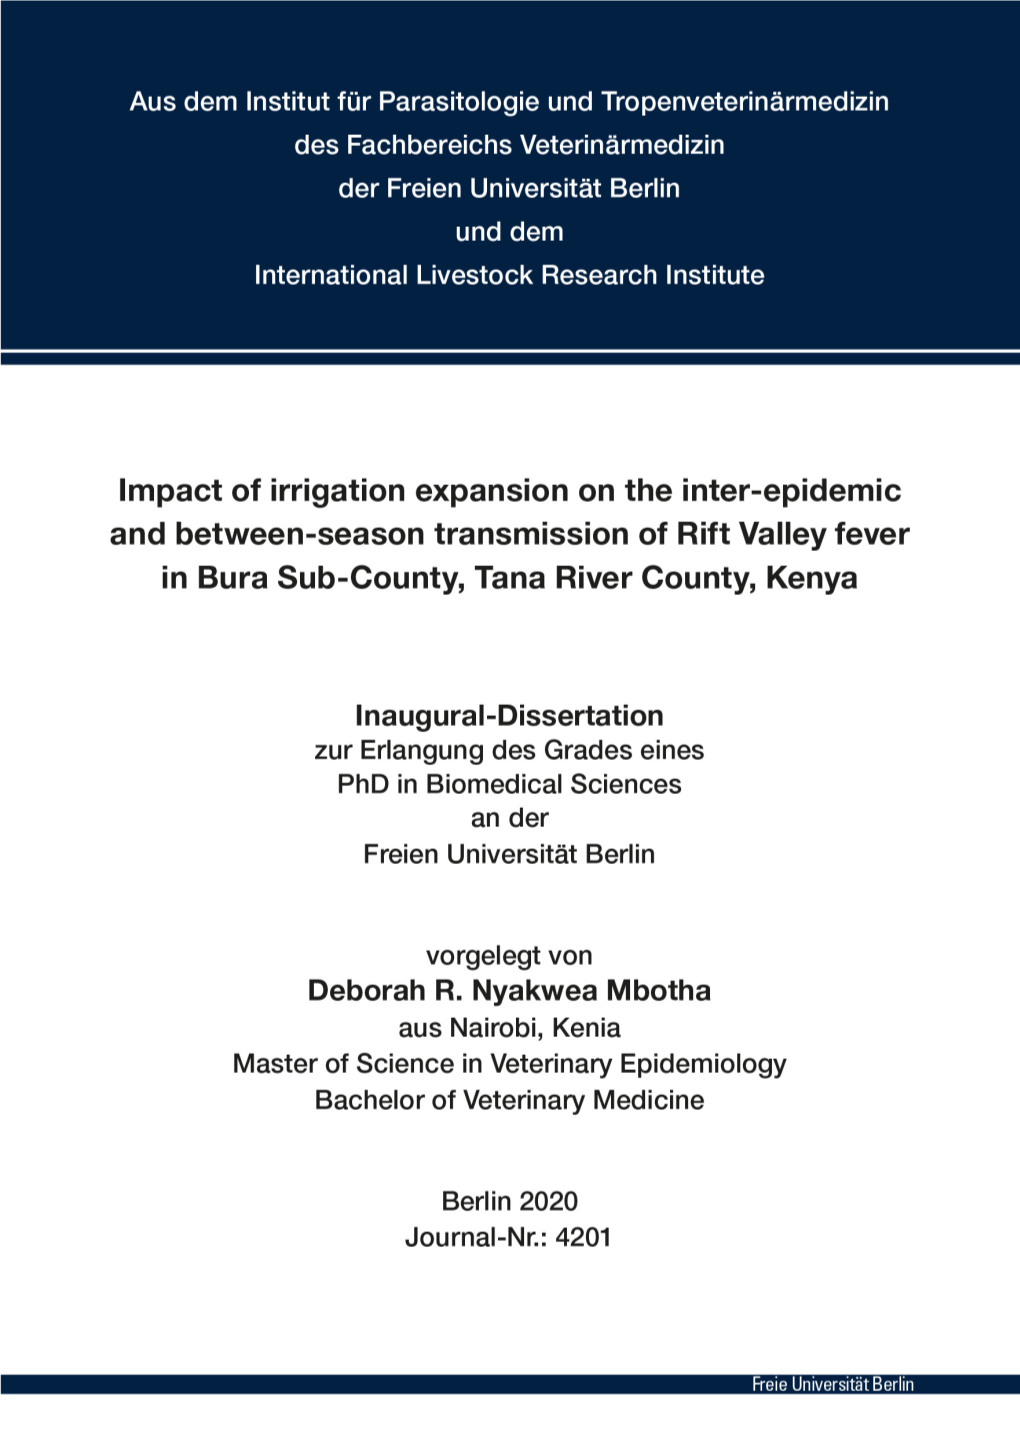 Impact of Irrigation Expansion on the Inter-Epidemic and Between-Season Transmission of Rift Valley Fever in Bura Sub-County, Tana River County, Kenya